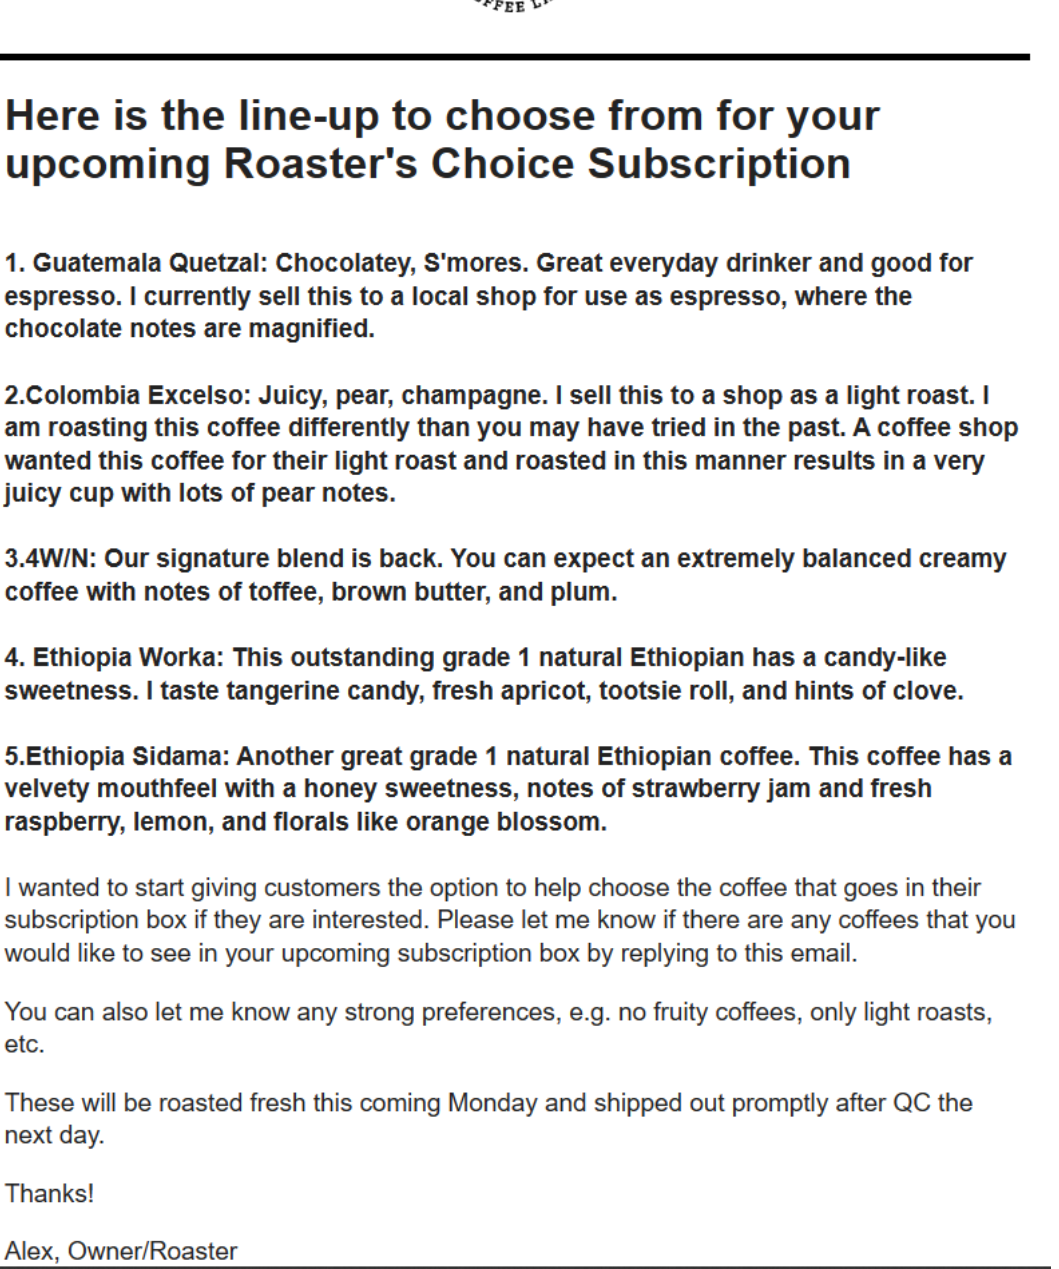 Roaster's Choice Subscription-Free Shipping